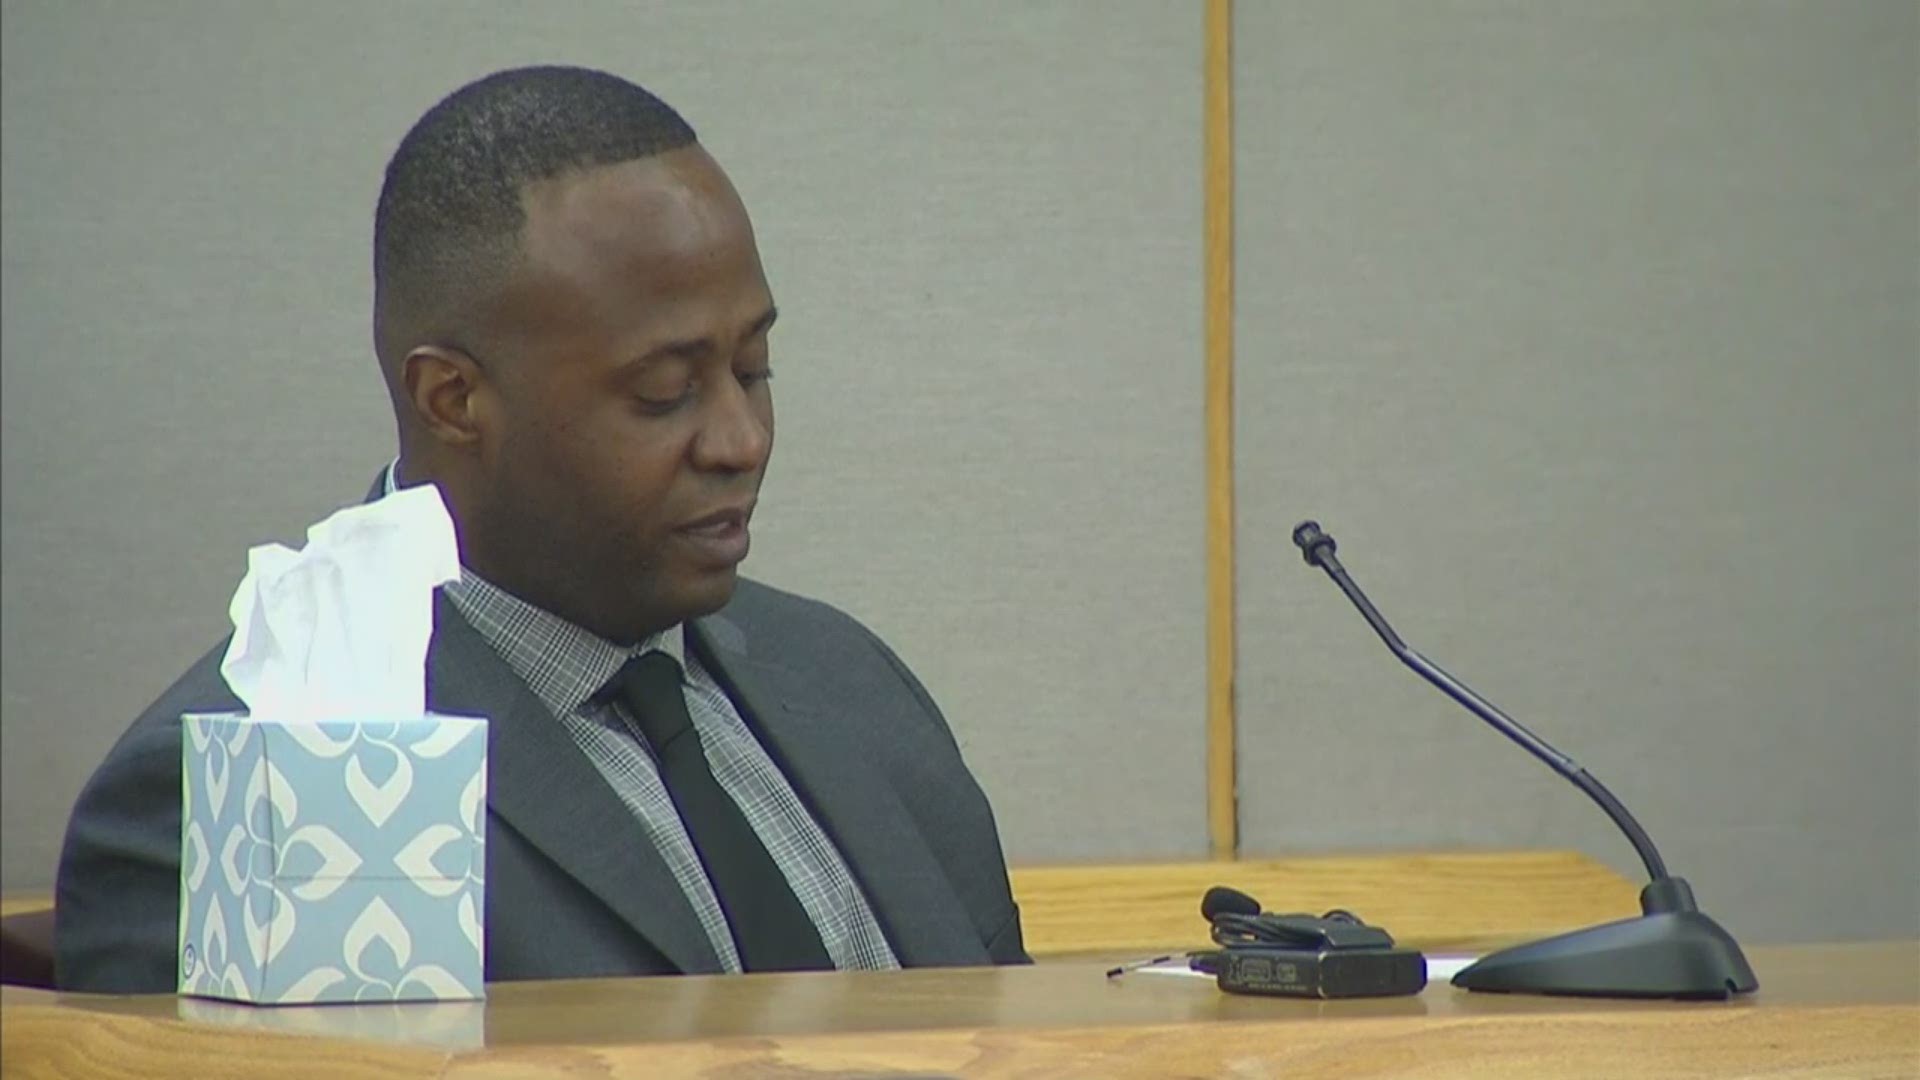 Former Mesquite officer Derrick Wiley testified that he feared for his life in an "instant moment of fear" when he shot Lyndo Jones last November. WFAA.com